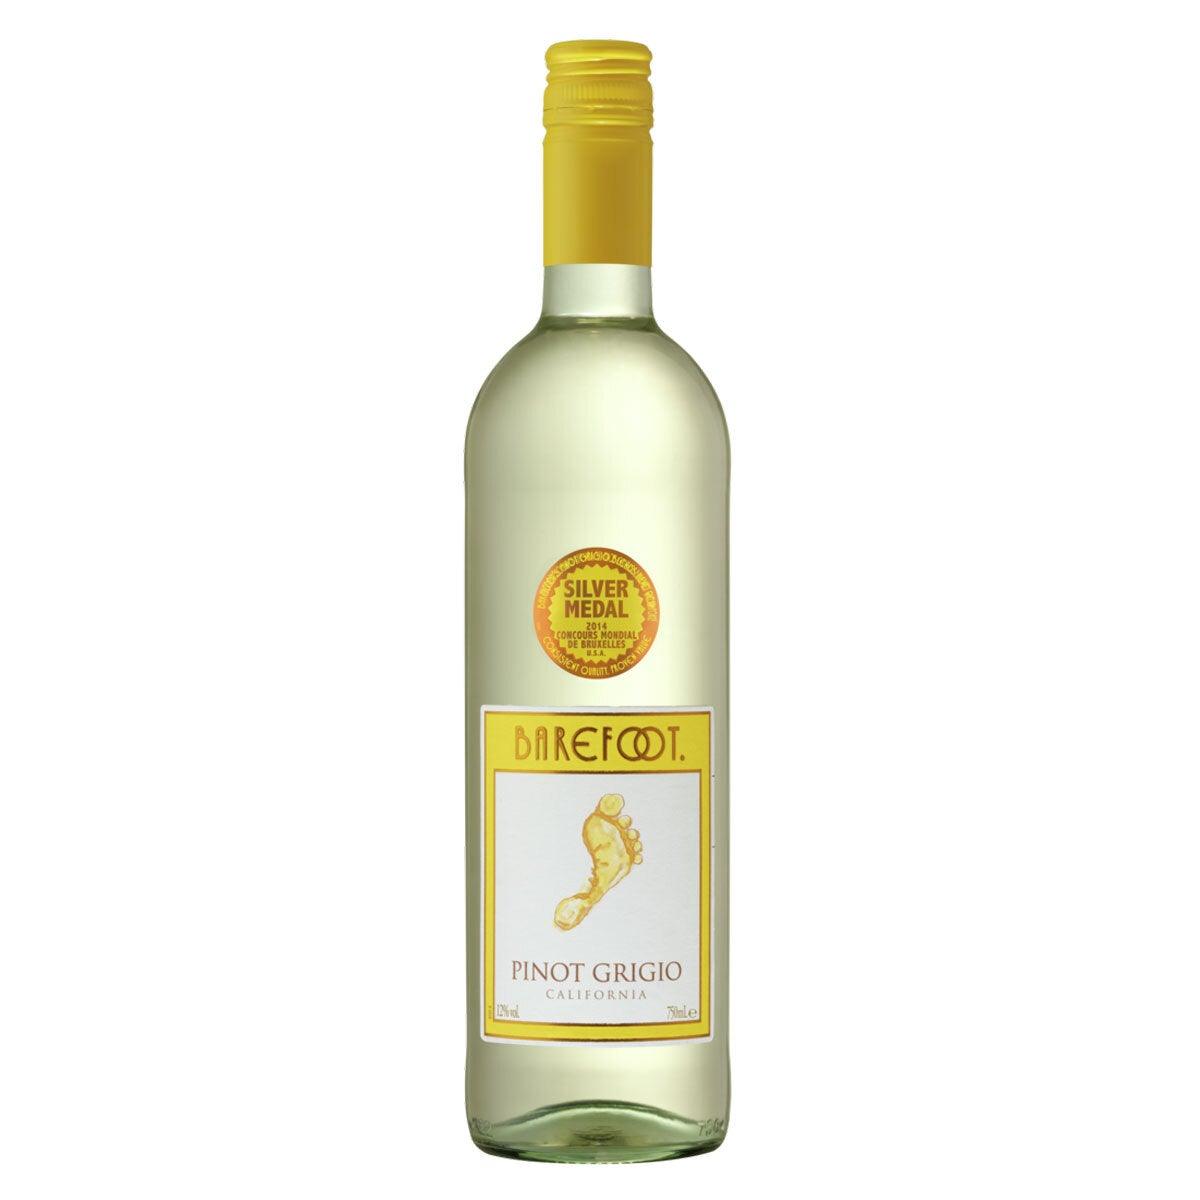 Barefoot Pinot Grigio 75cl - McGrocer